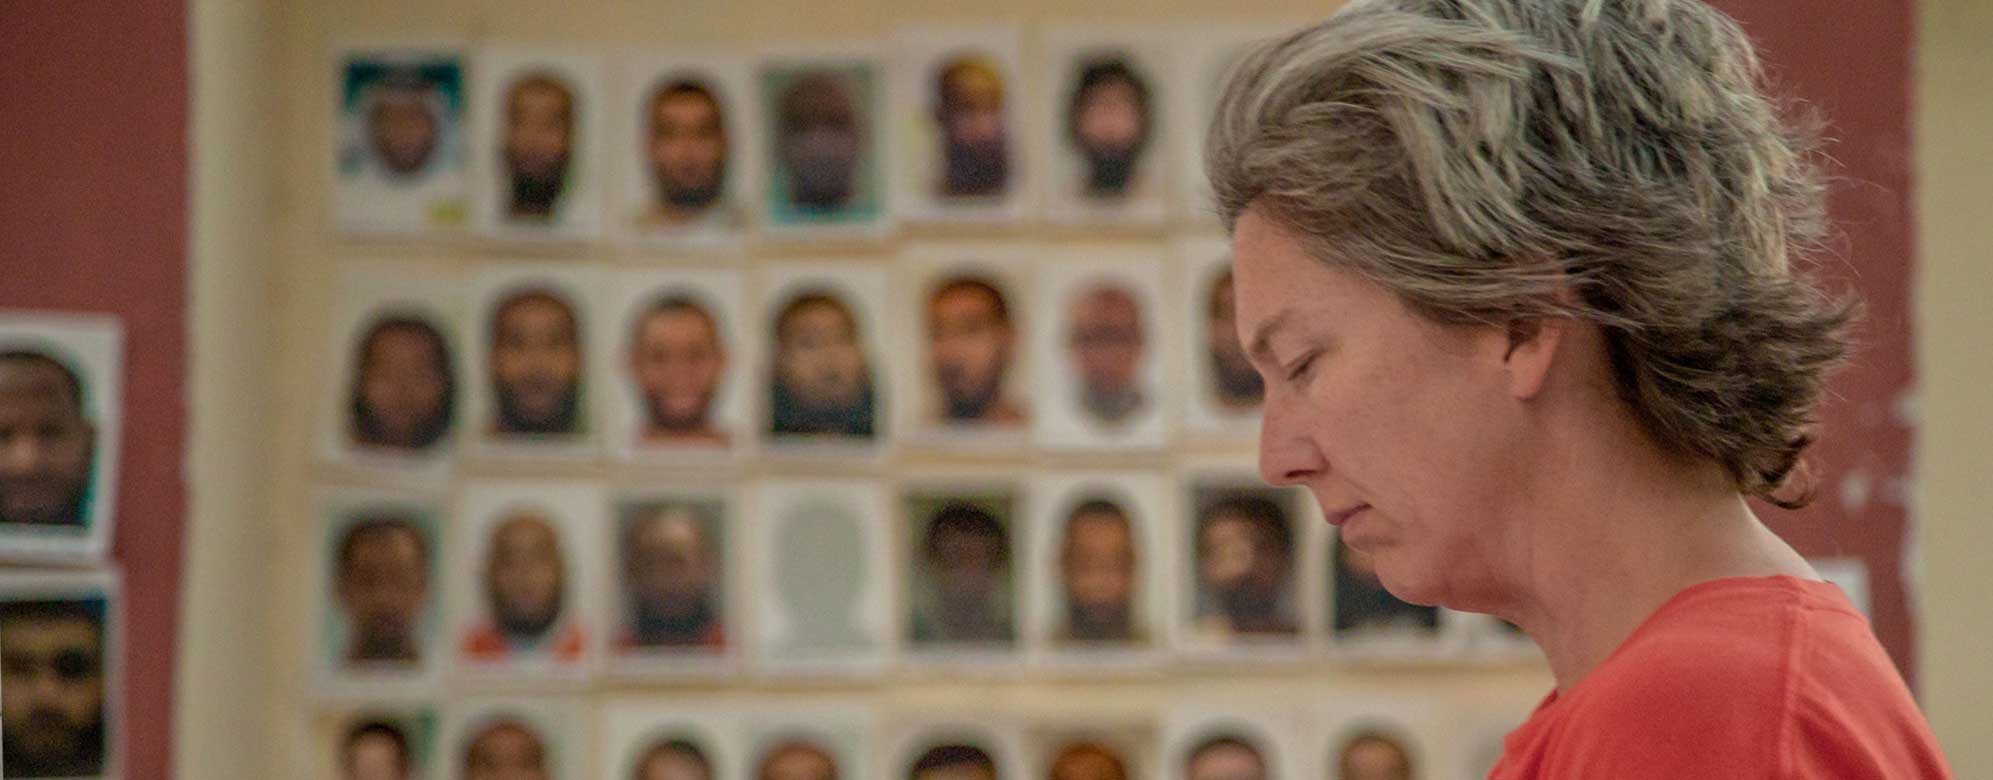 Frida Berrigan Standing by a Wall of Guantánamo Detainee Photos